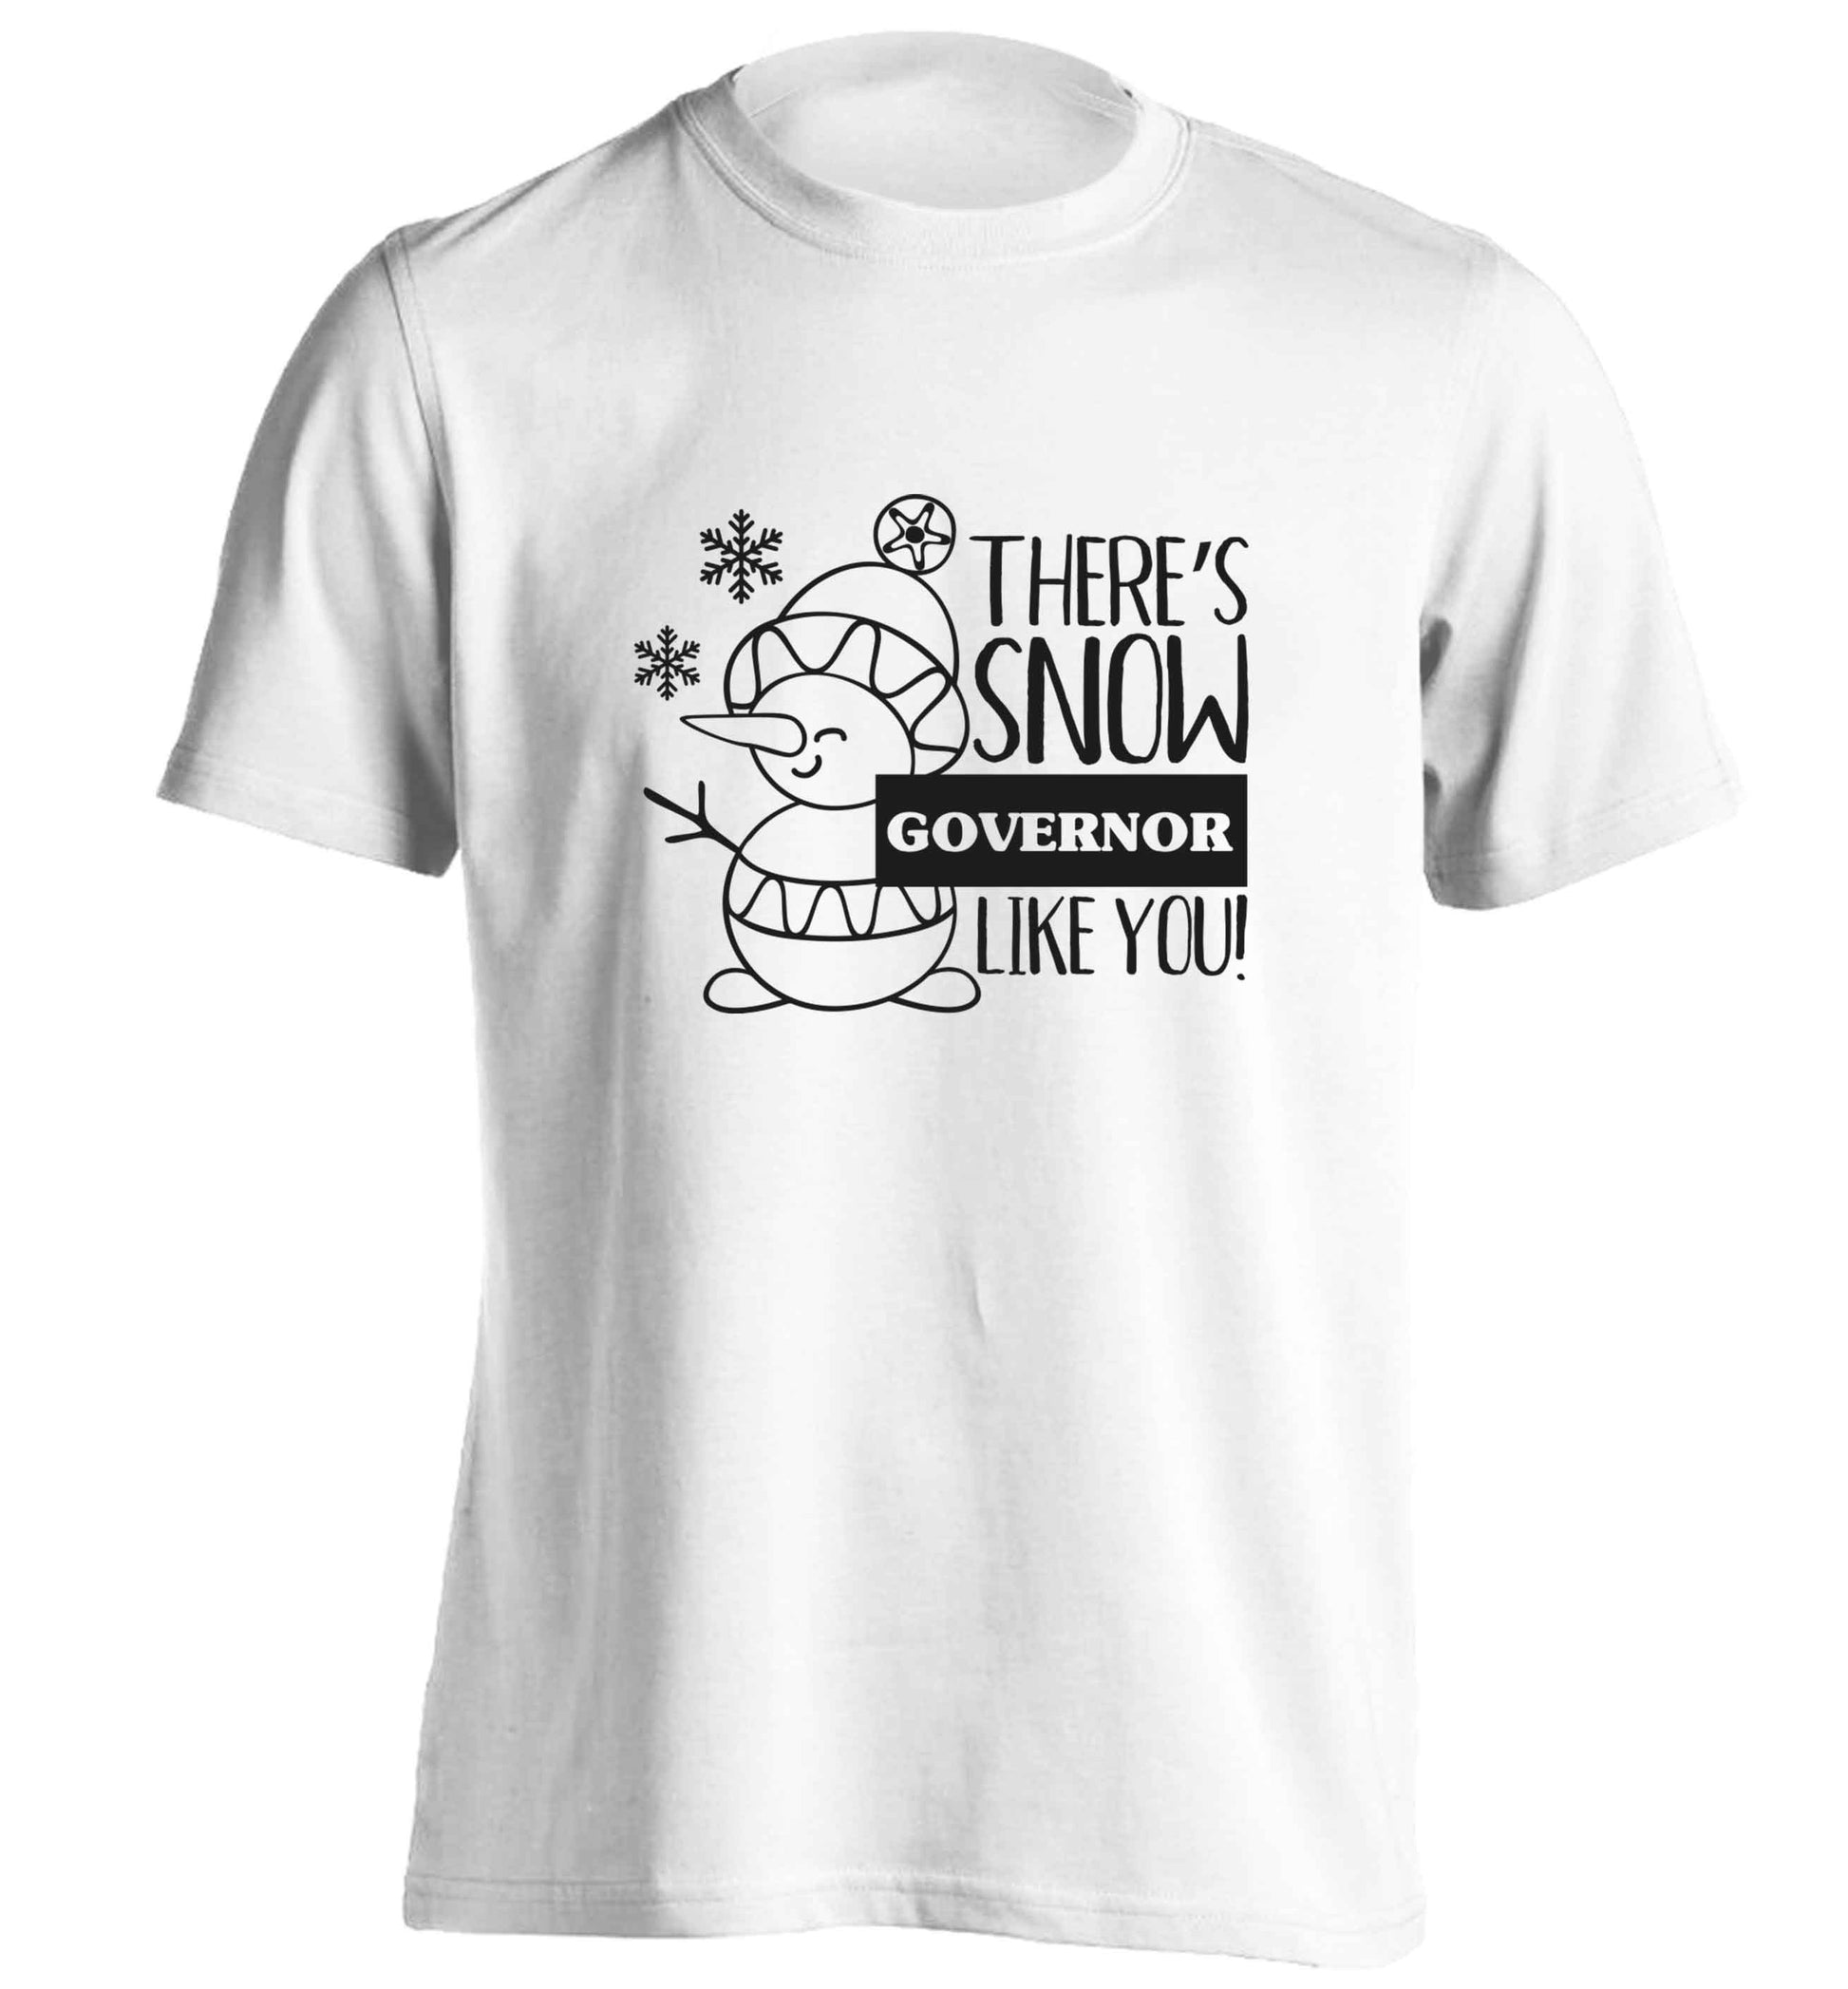 There's snow governor like you adults unisex white Tshirt 2XL